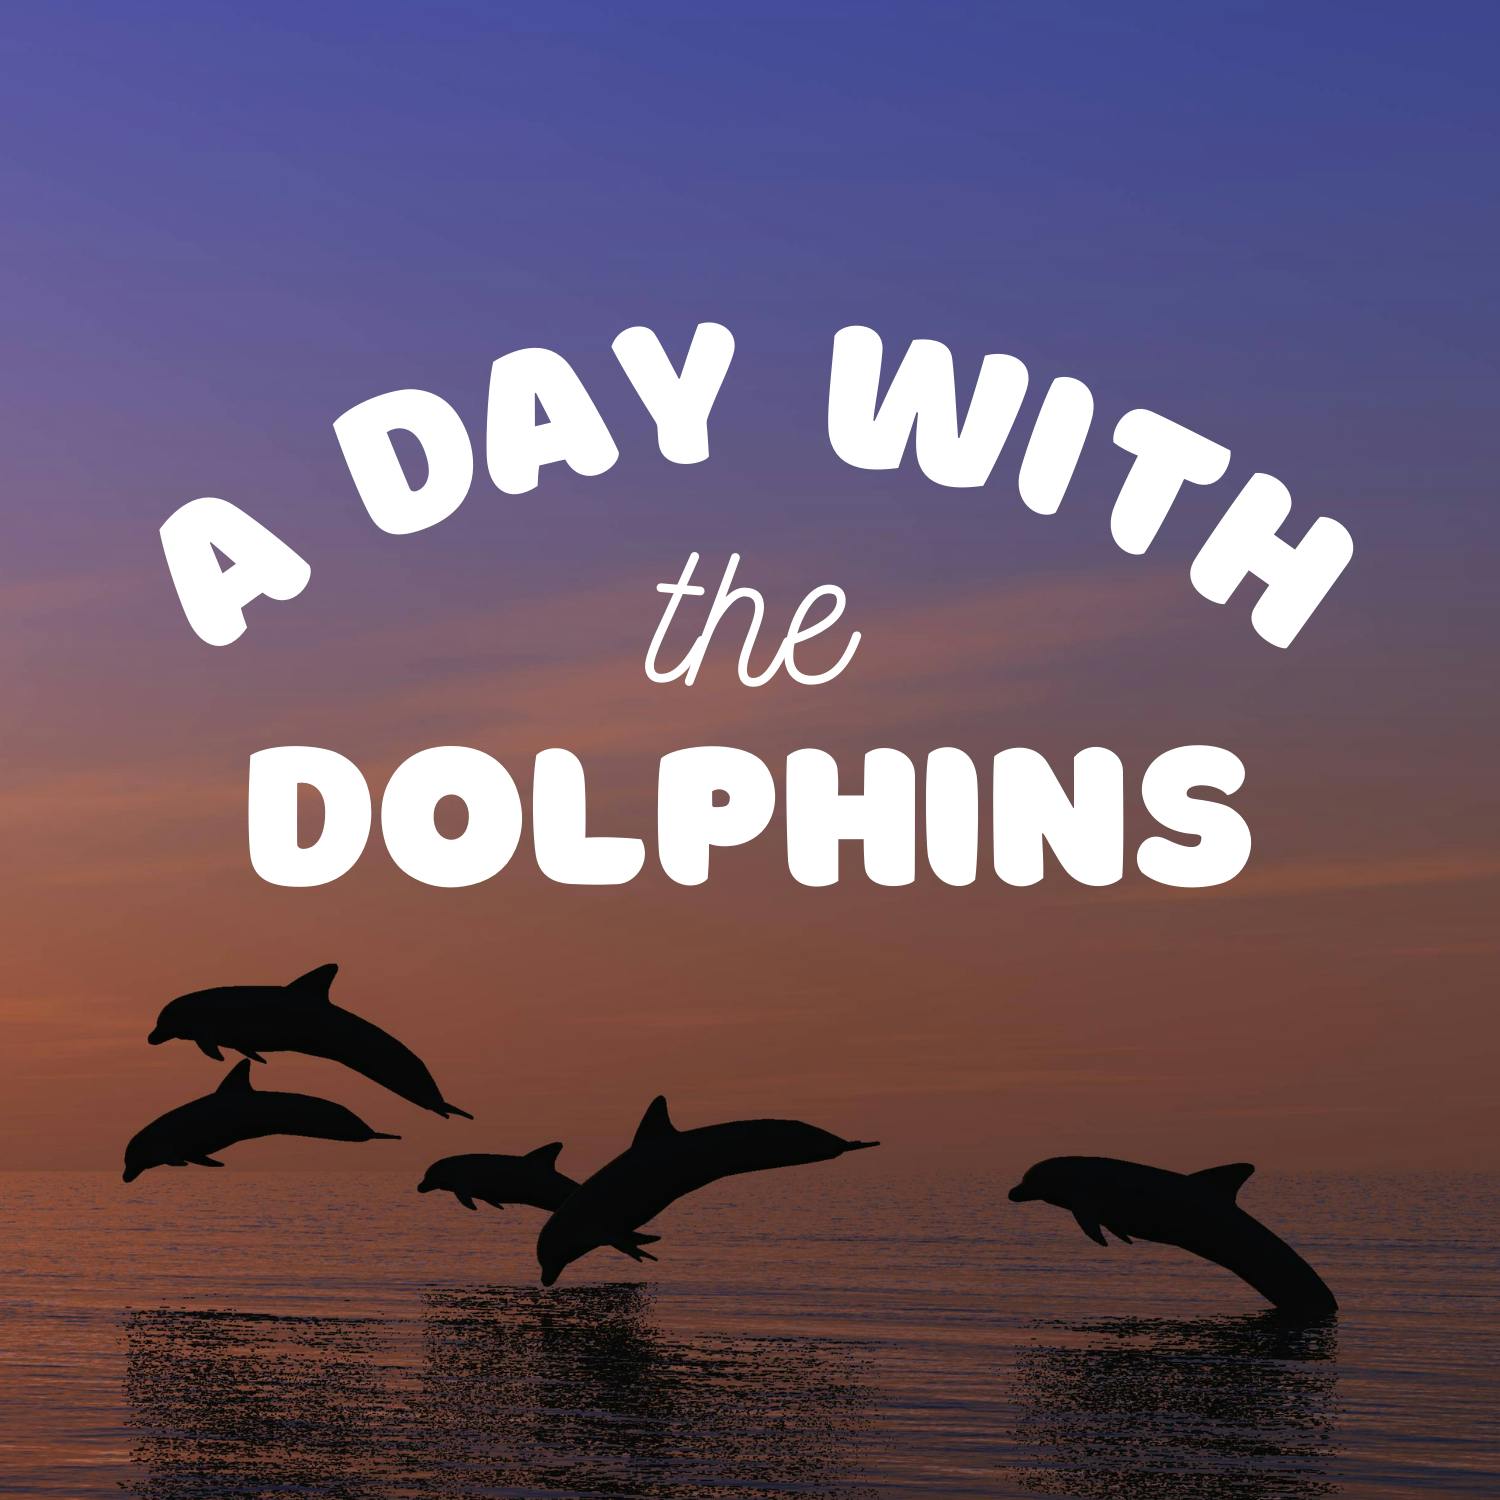 A Day with the Dolphins